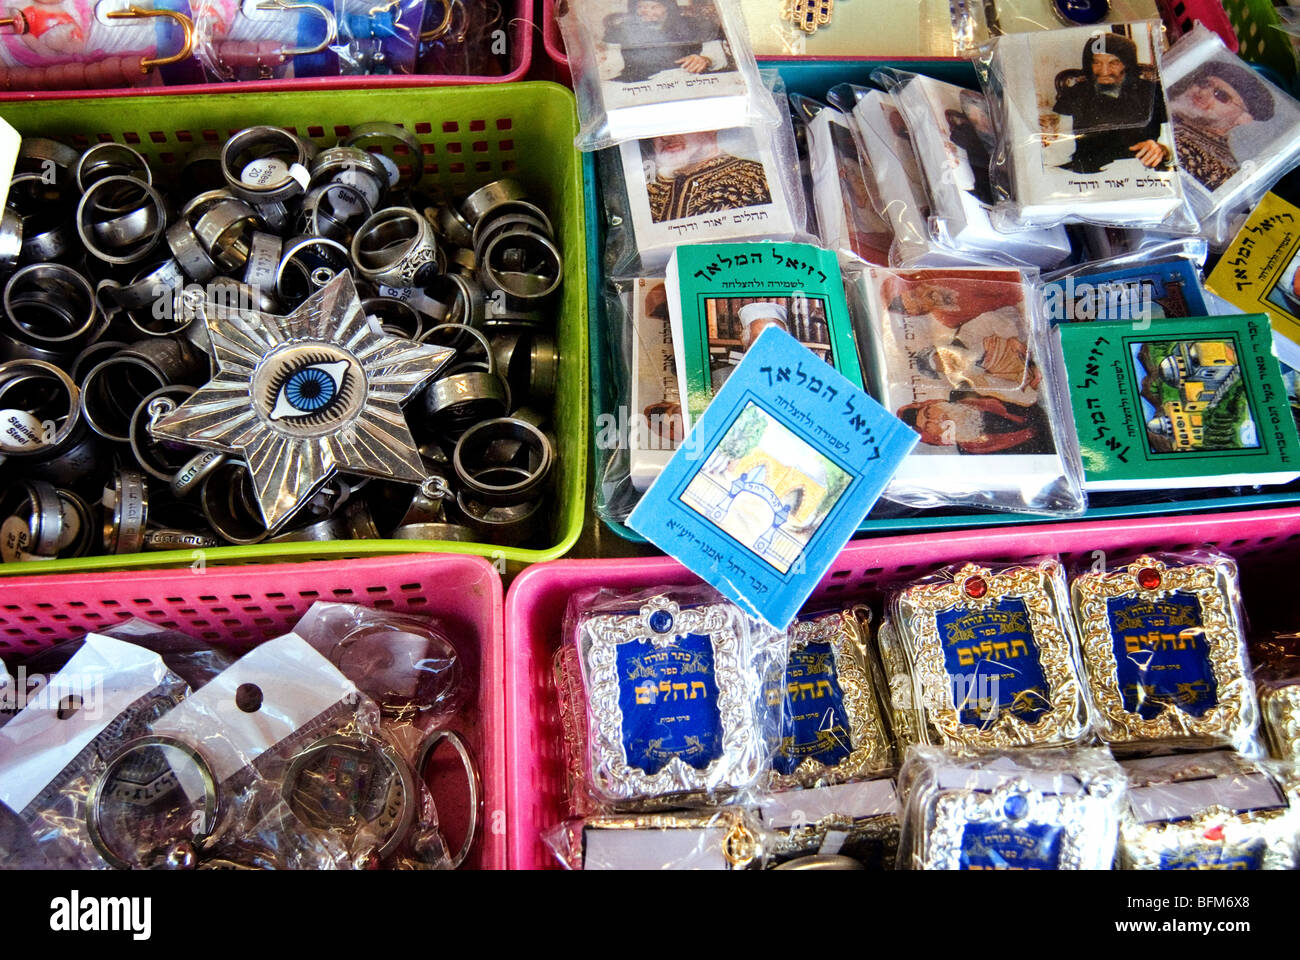 Israel, Tiberias, A stall selling Jewish amulets at he tomb and synagogue of Rabbi Meir Baal Ha Ness Stock Photo